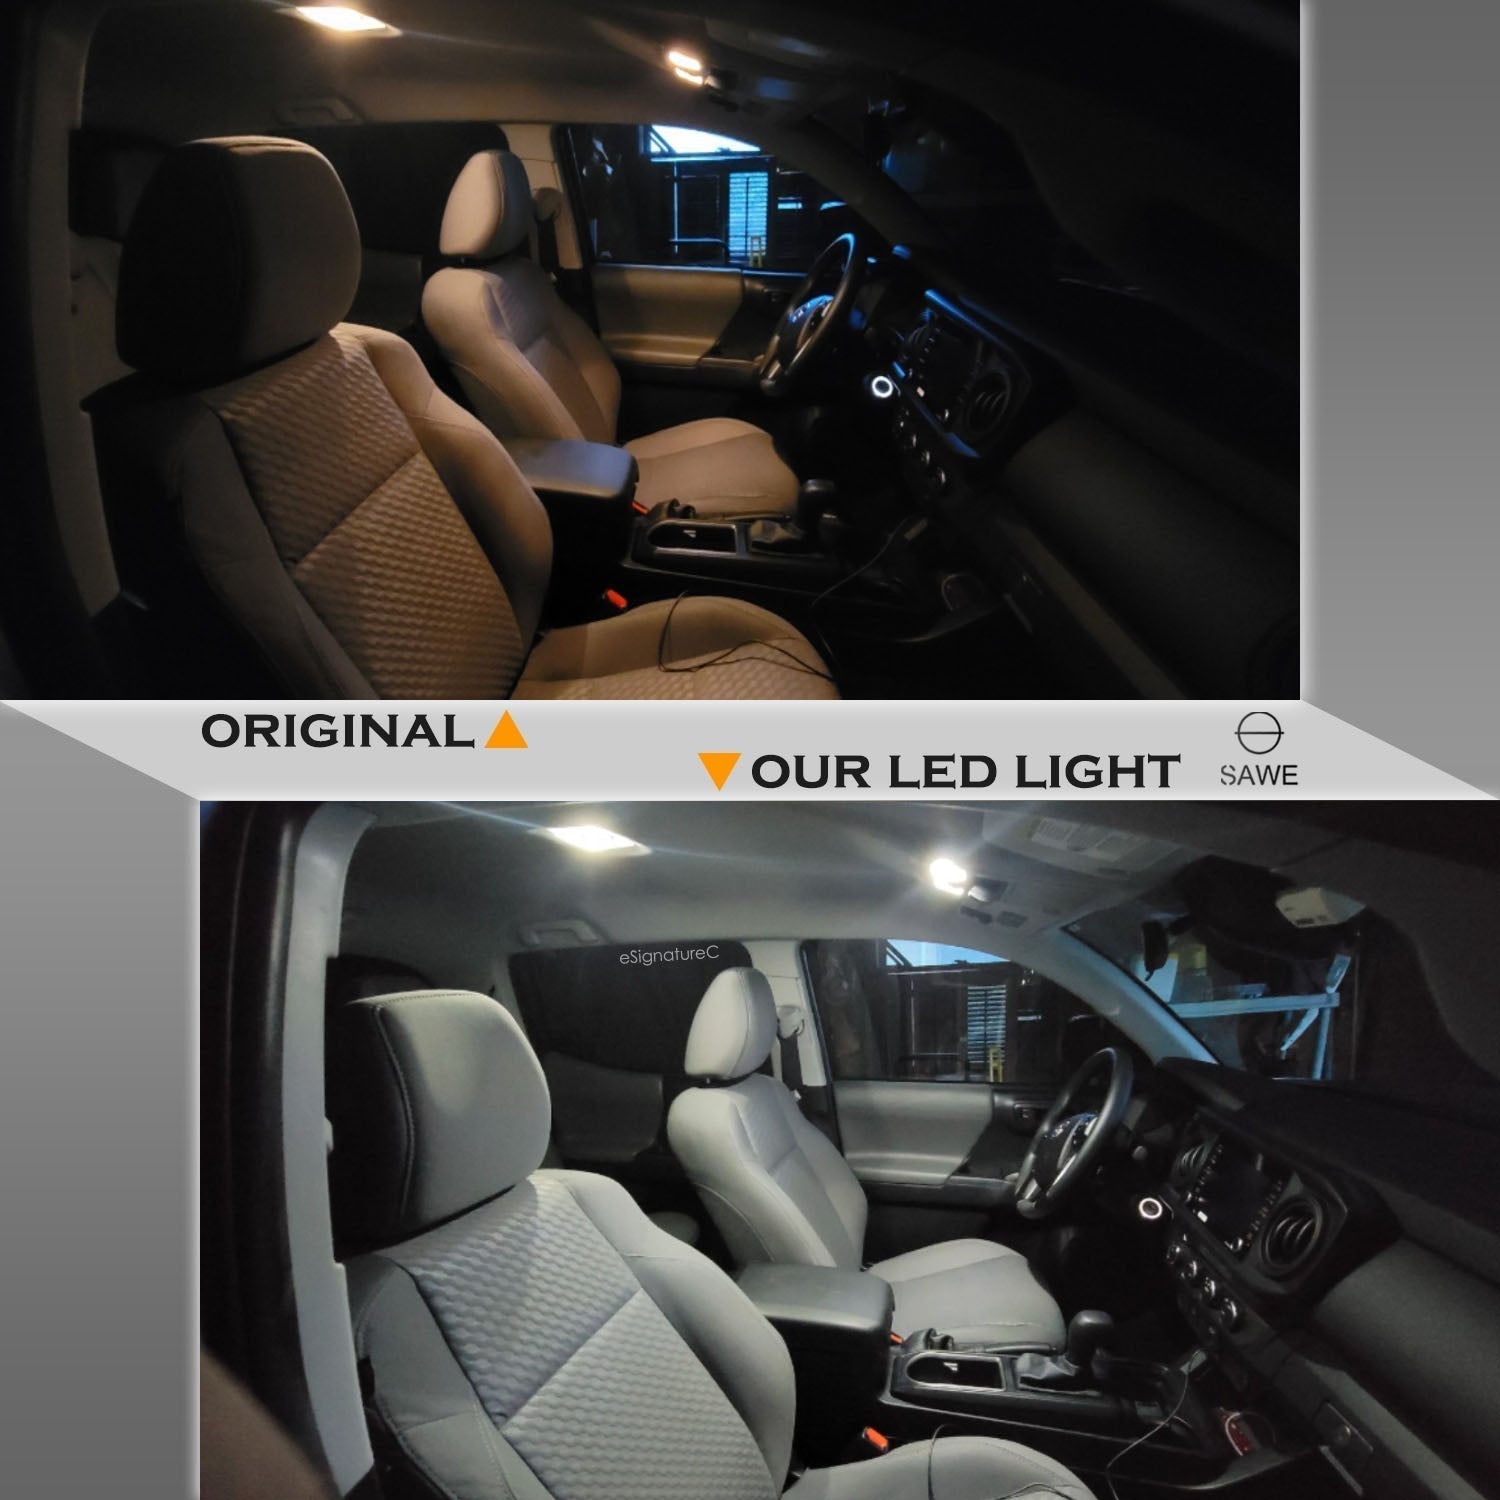 For Cadillac CTS Interior LED Lights - Dome & Map Light Bulbs Package Kit for 2008 - 2013 - White